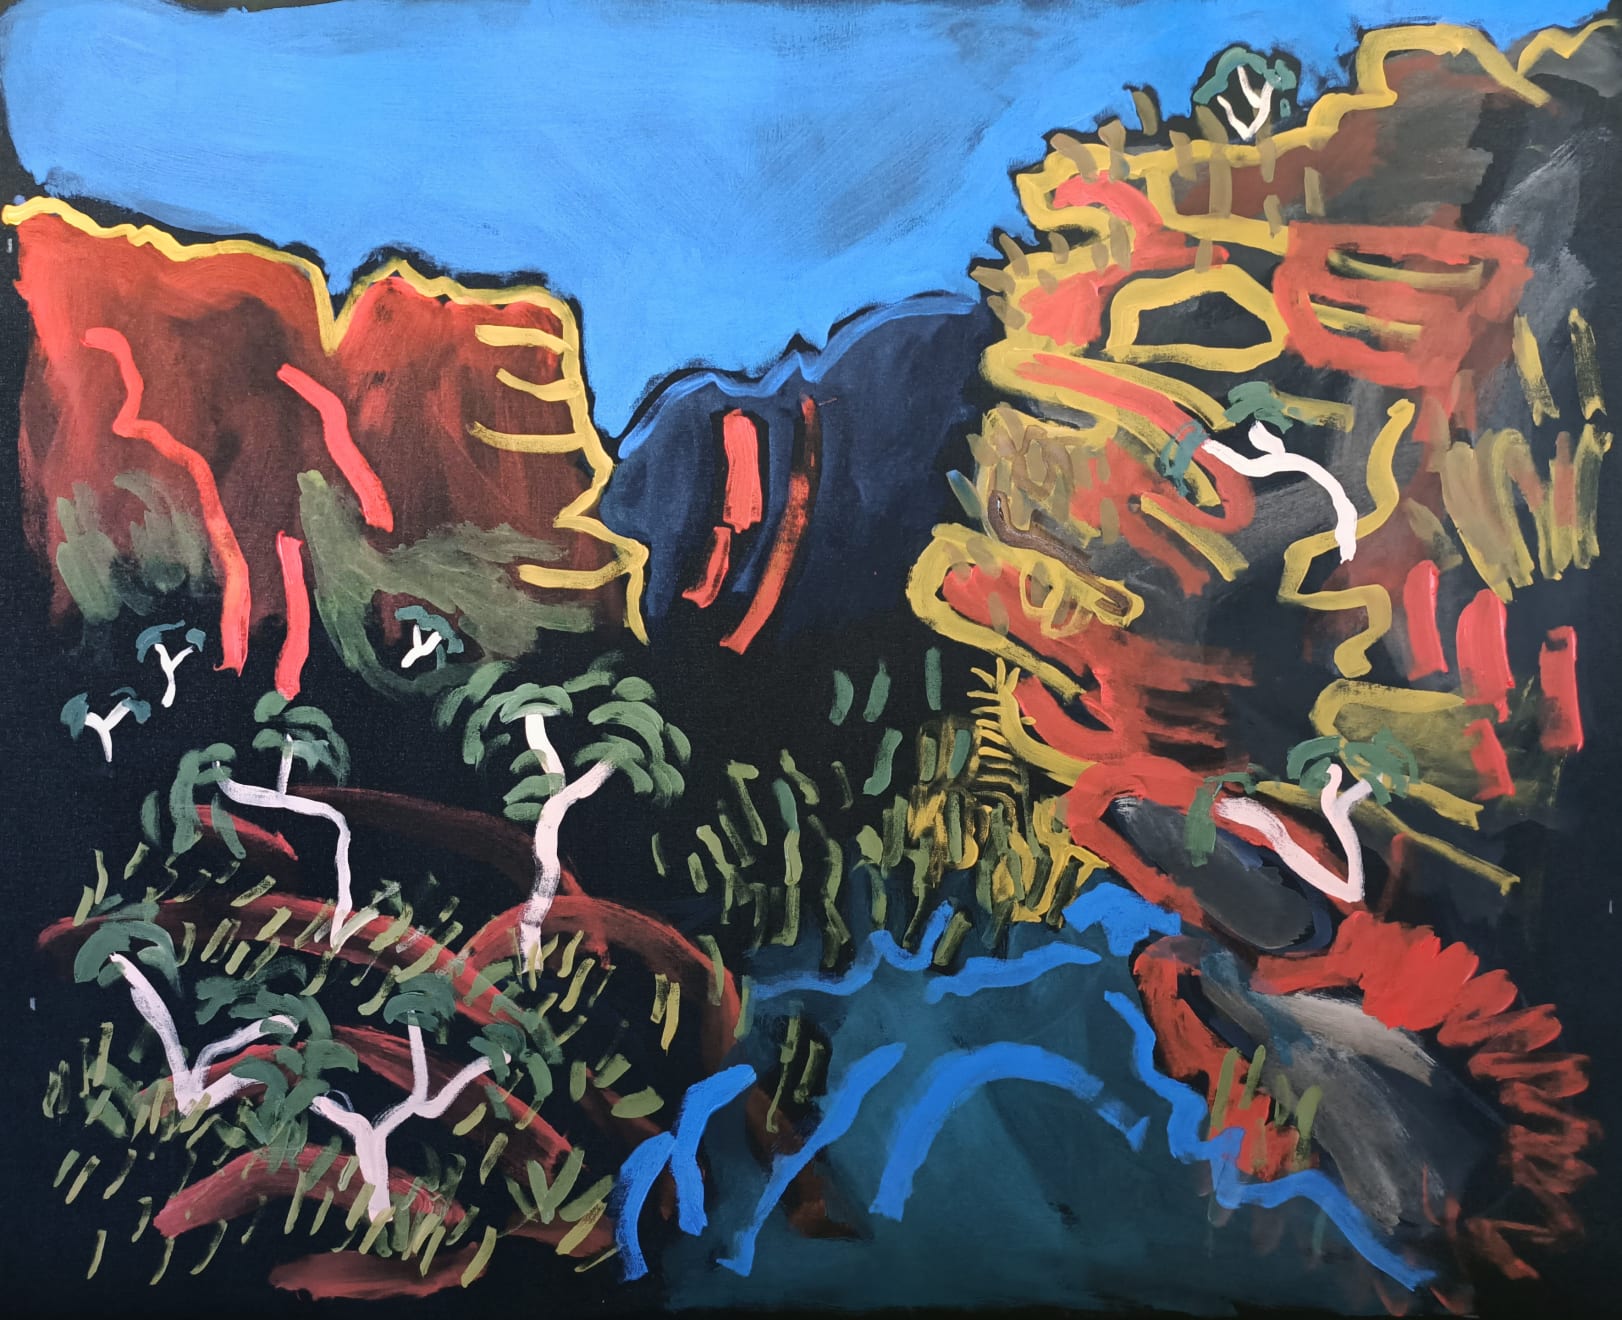 chain of ponds (atneperrke) trail, top waterhole Acrylic on Canvas Original 110 x 90 cm AUD $2200 GBP £1115 SOLD